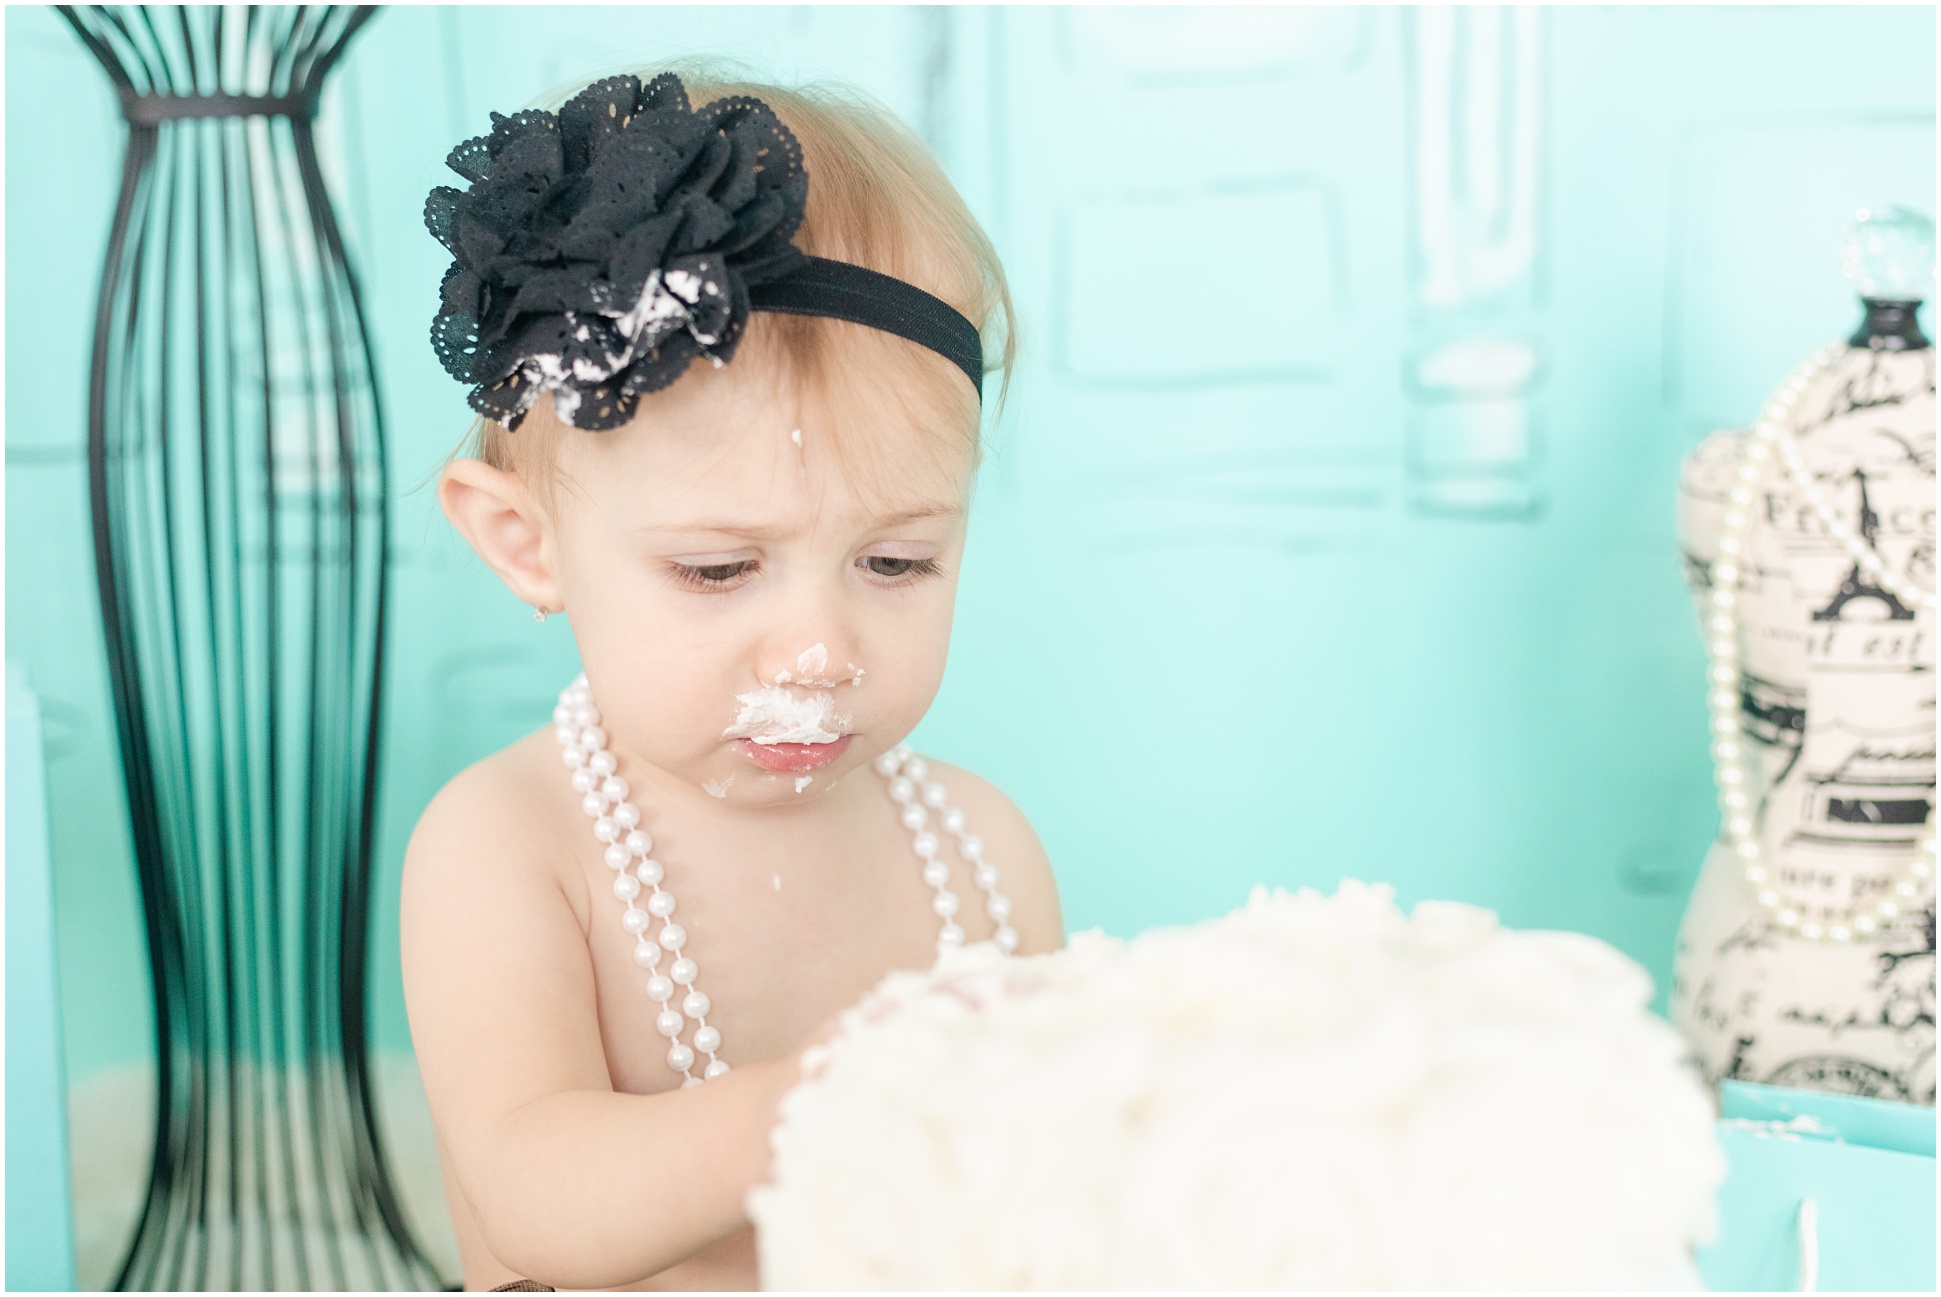 Lily in black flower headband and white pearls eating cake with frosting all on her face